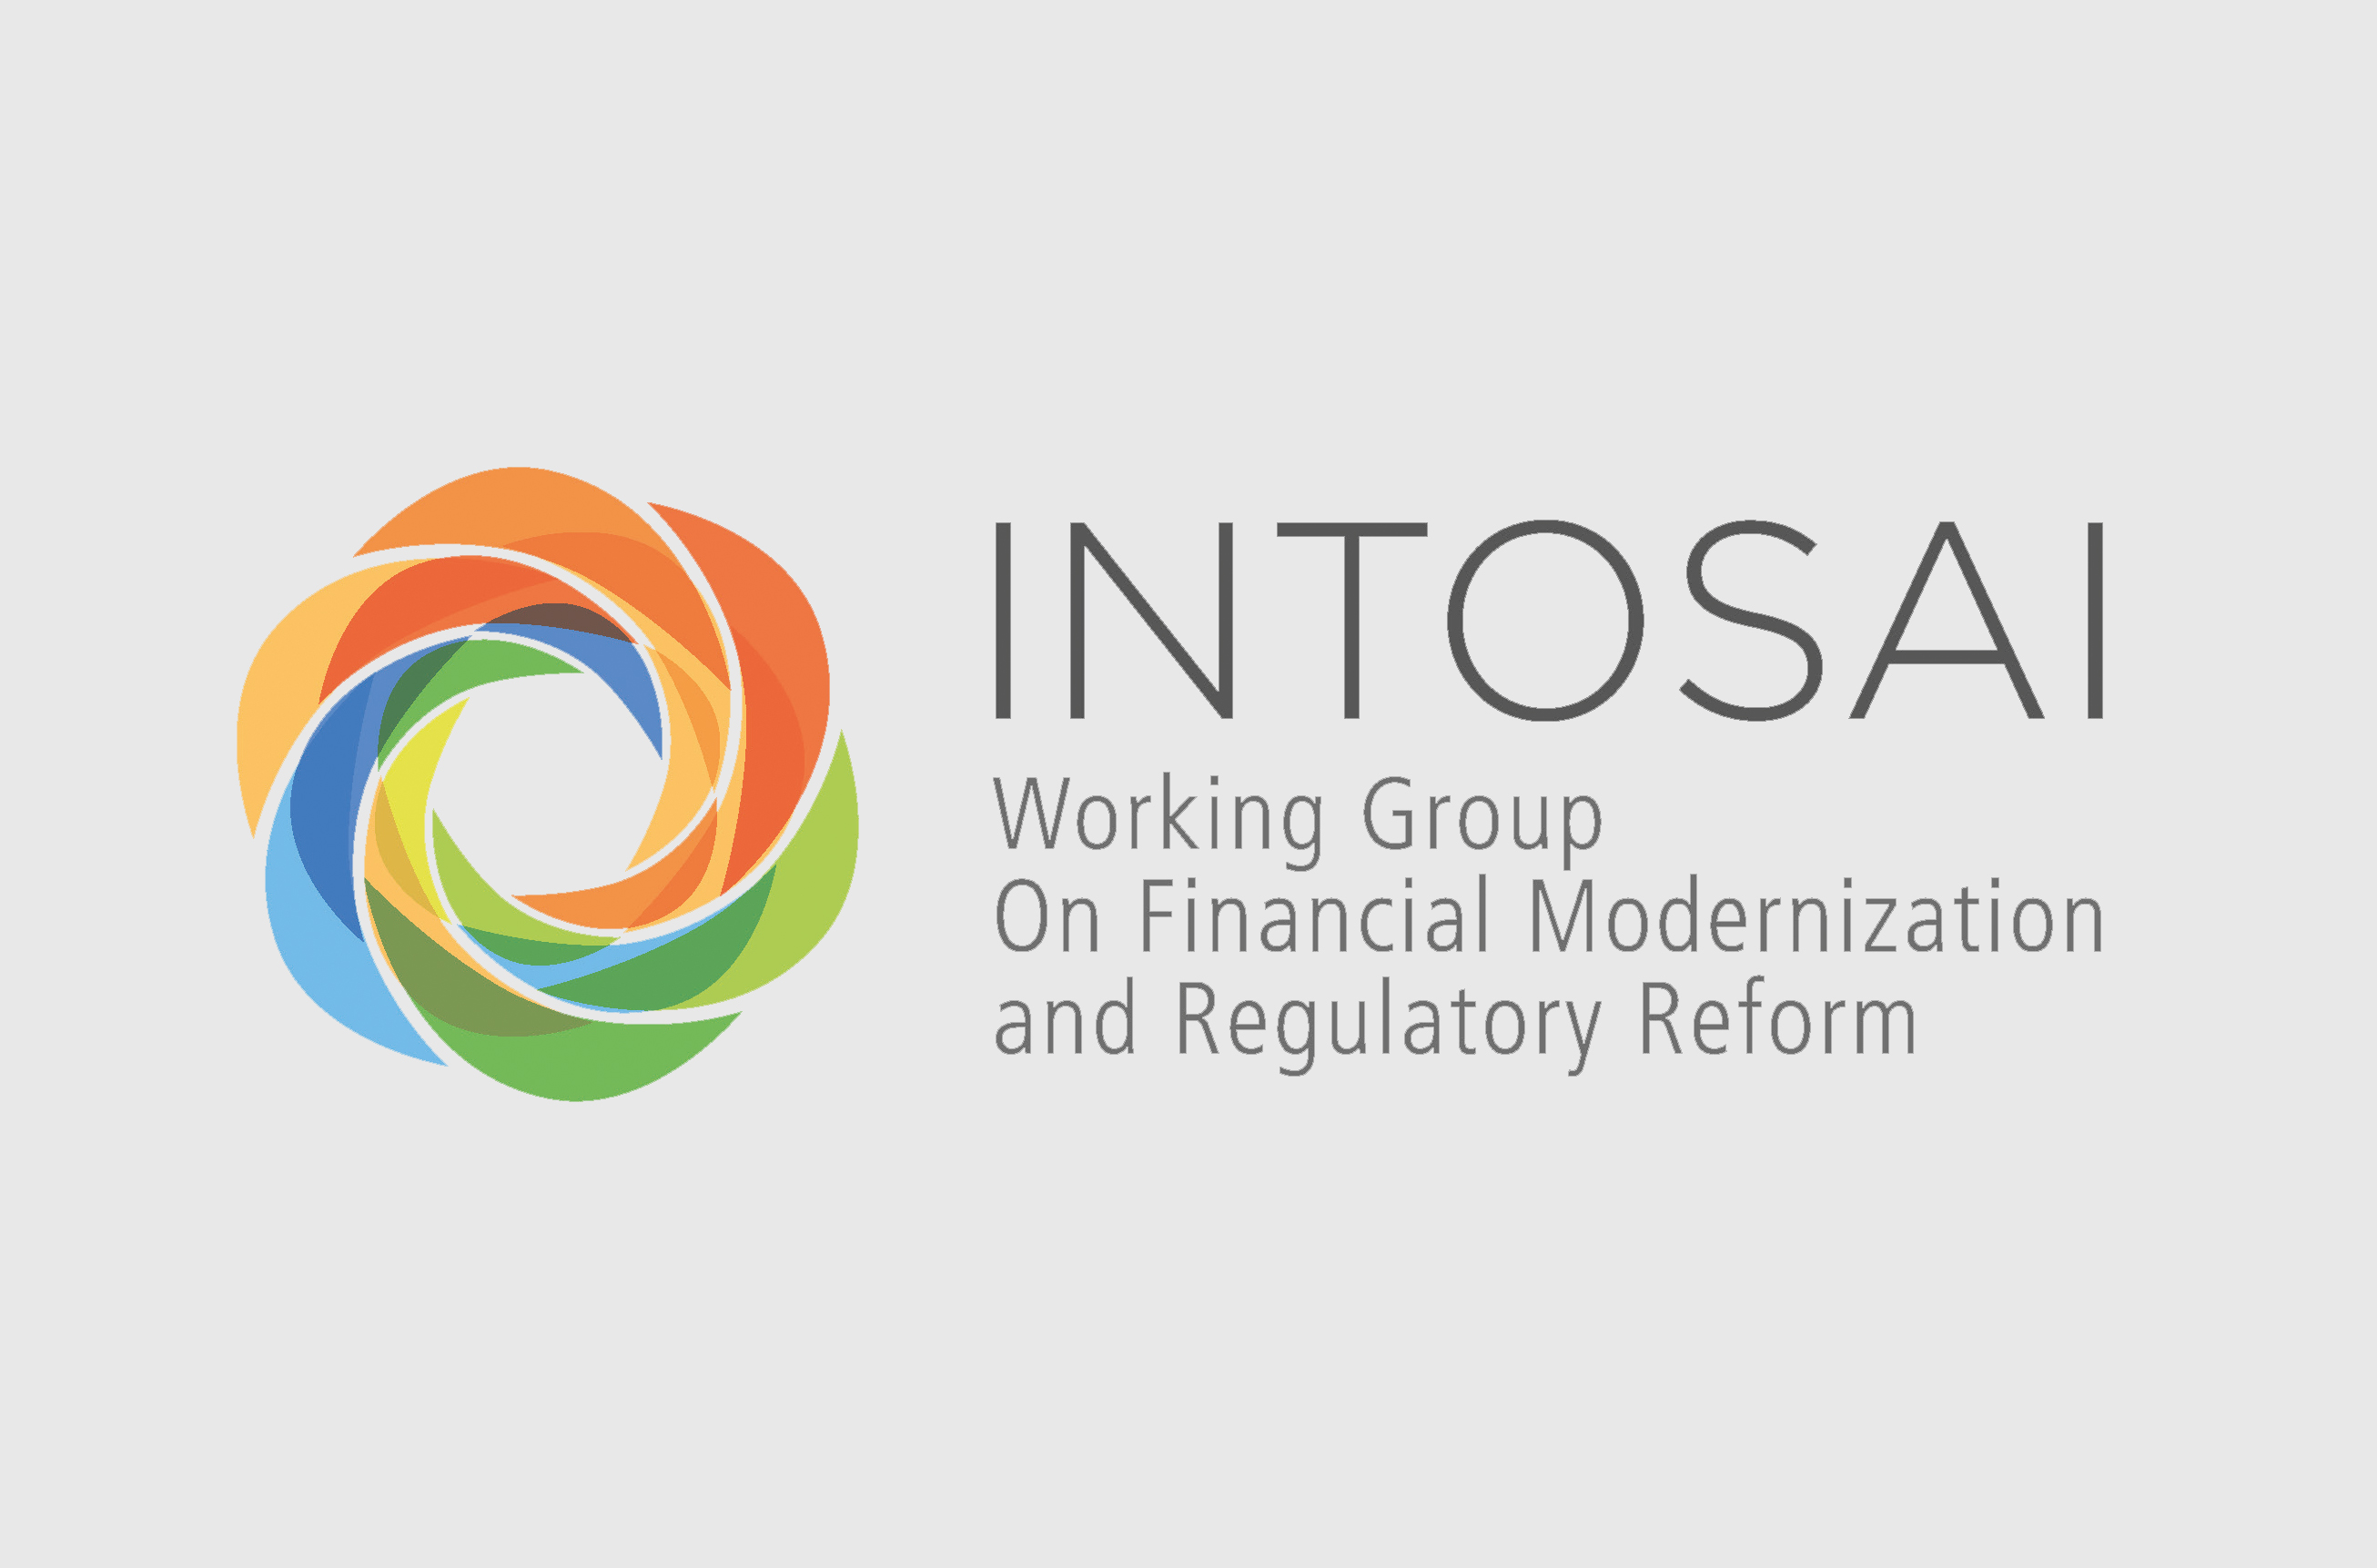 Virtual Meeting of the INTOSAI Working Group on Financial Modernization and Regulatory Reform